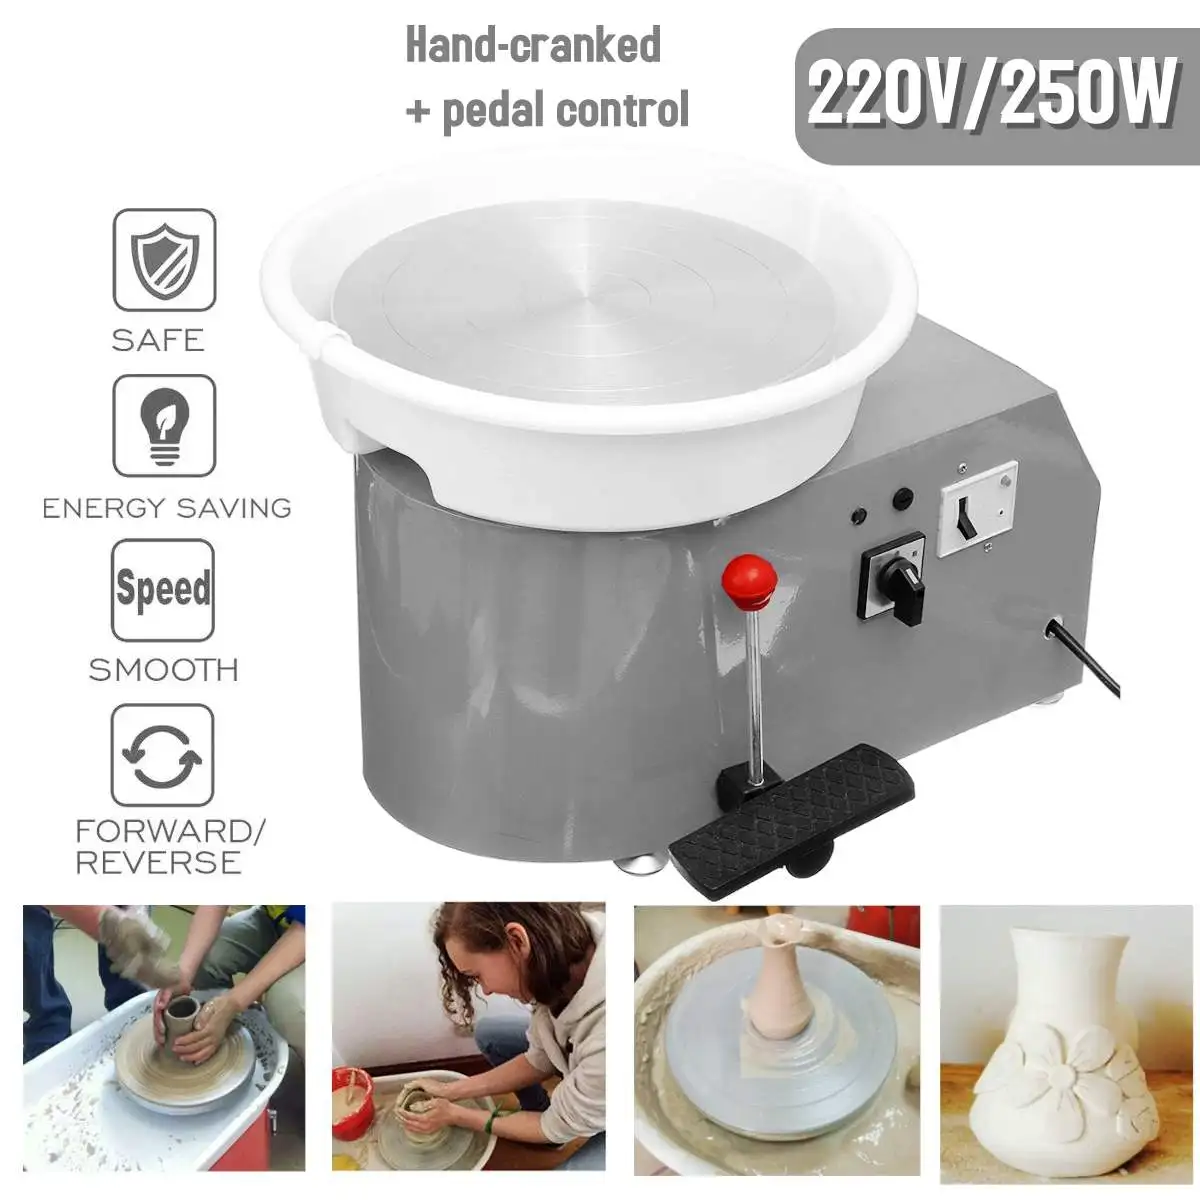 Pottery Wheel Machine 32cm 220V 250W Hand cranked and pedal control peda Ceramic Work Clay Art With Mobile Smooth Low Noise - Color: Light Grey